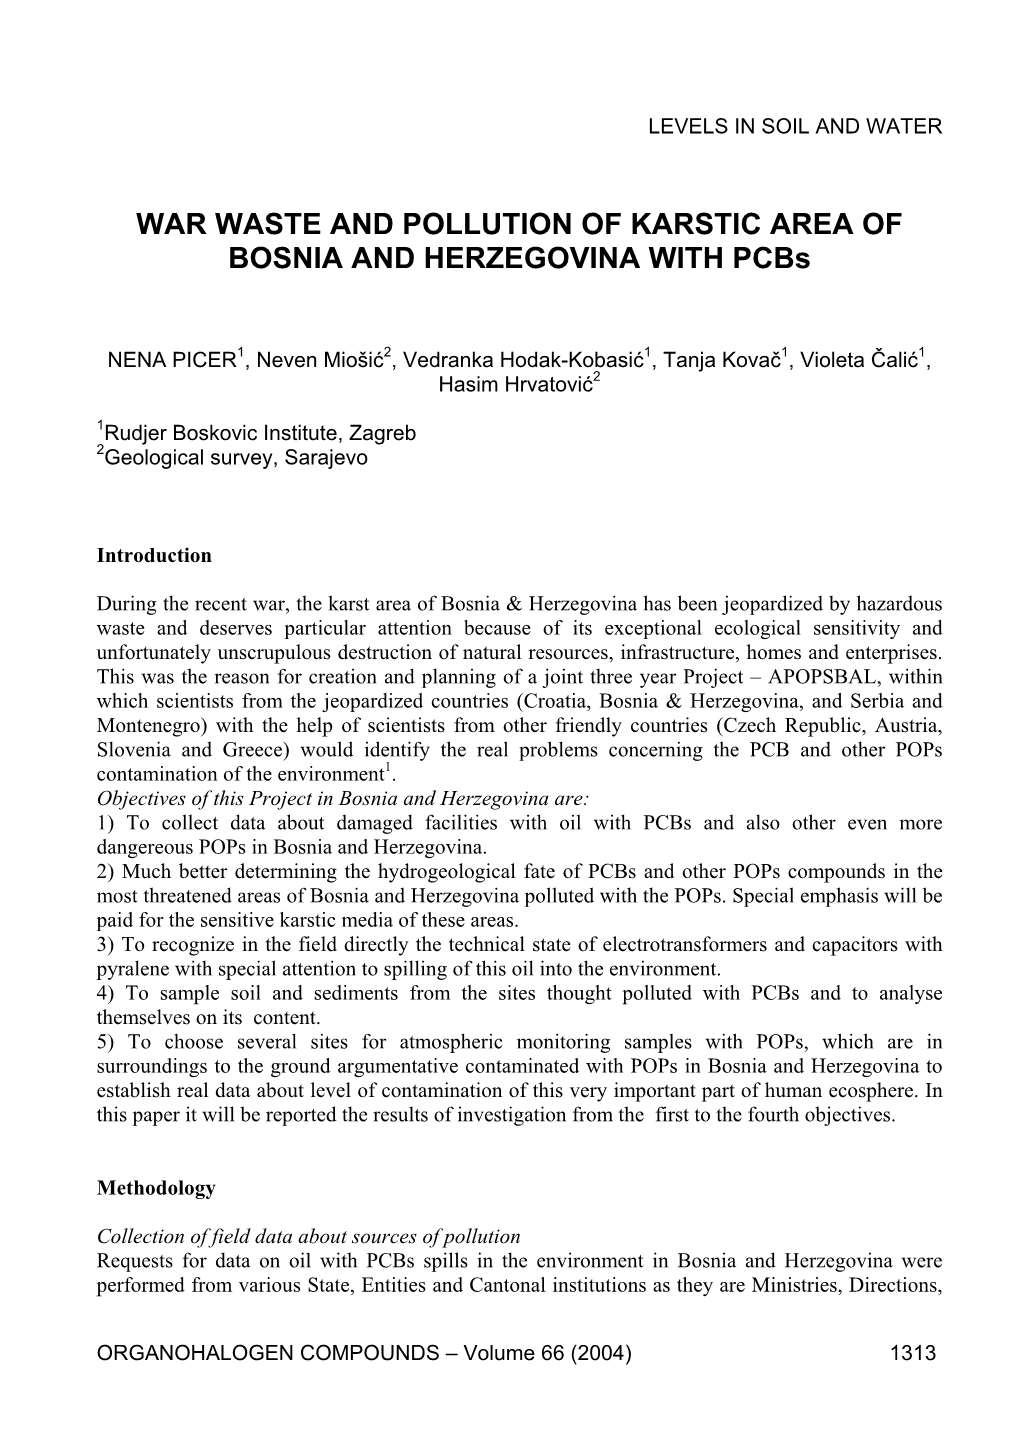 WAR WASTE and POLLUTION of KARSTIC AREA of BOSNIA and HERZEGOVINA with Pcbs